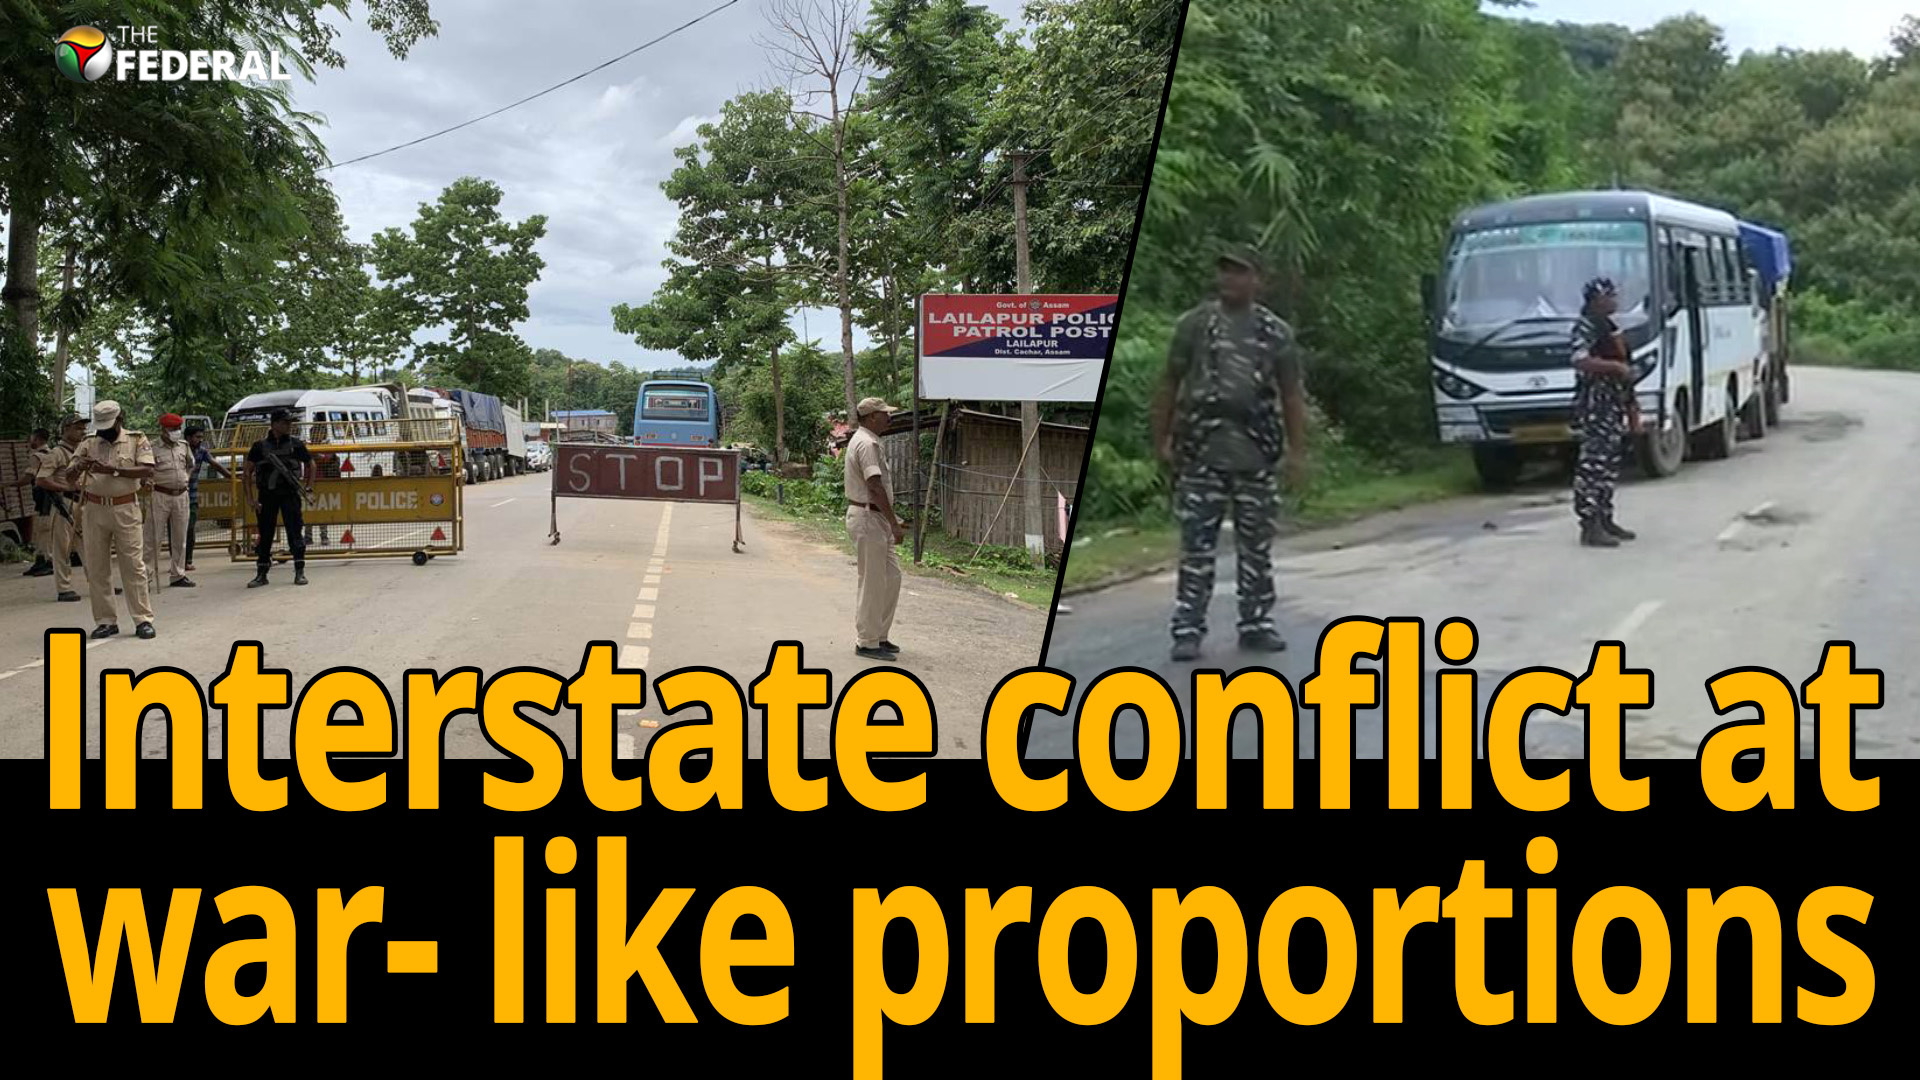 Two Indian states fortify borders separating them, tension escalates